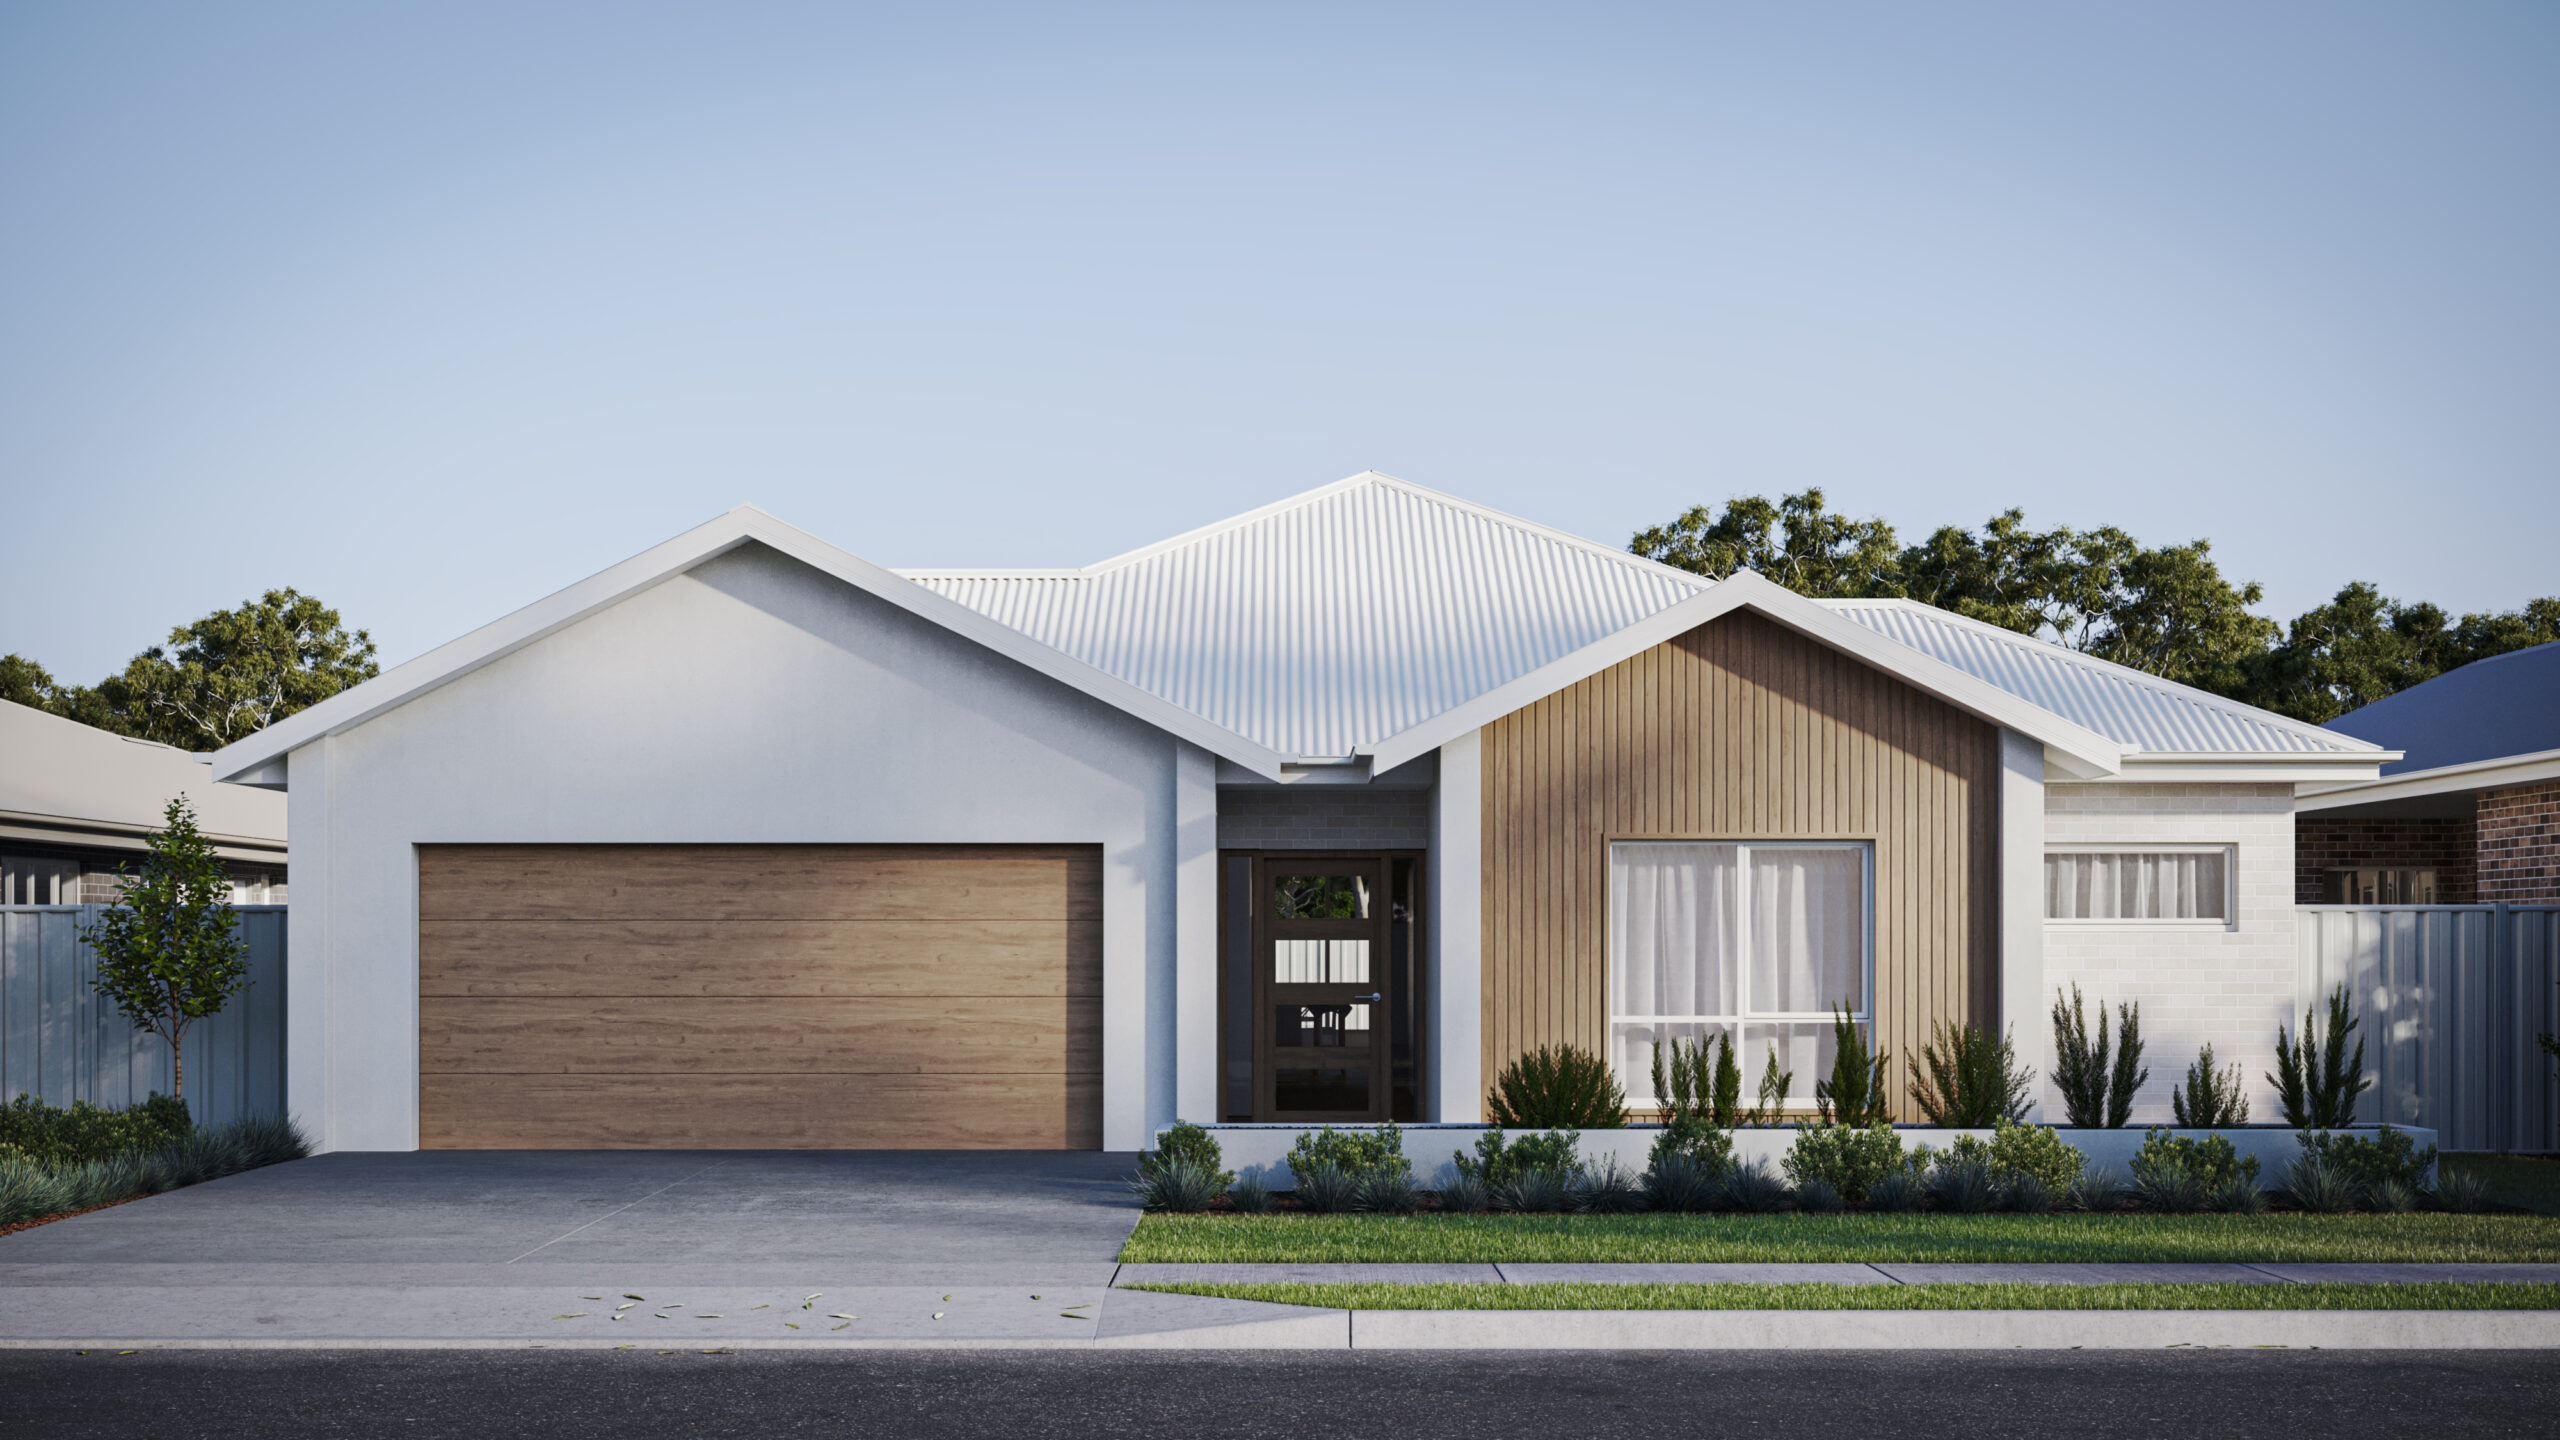 Series 14 ASL Render 2 Single storey modern coastal house facade with white render and timber shiplap cladding.